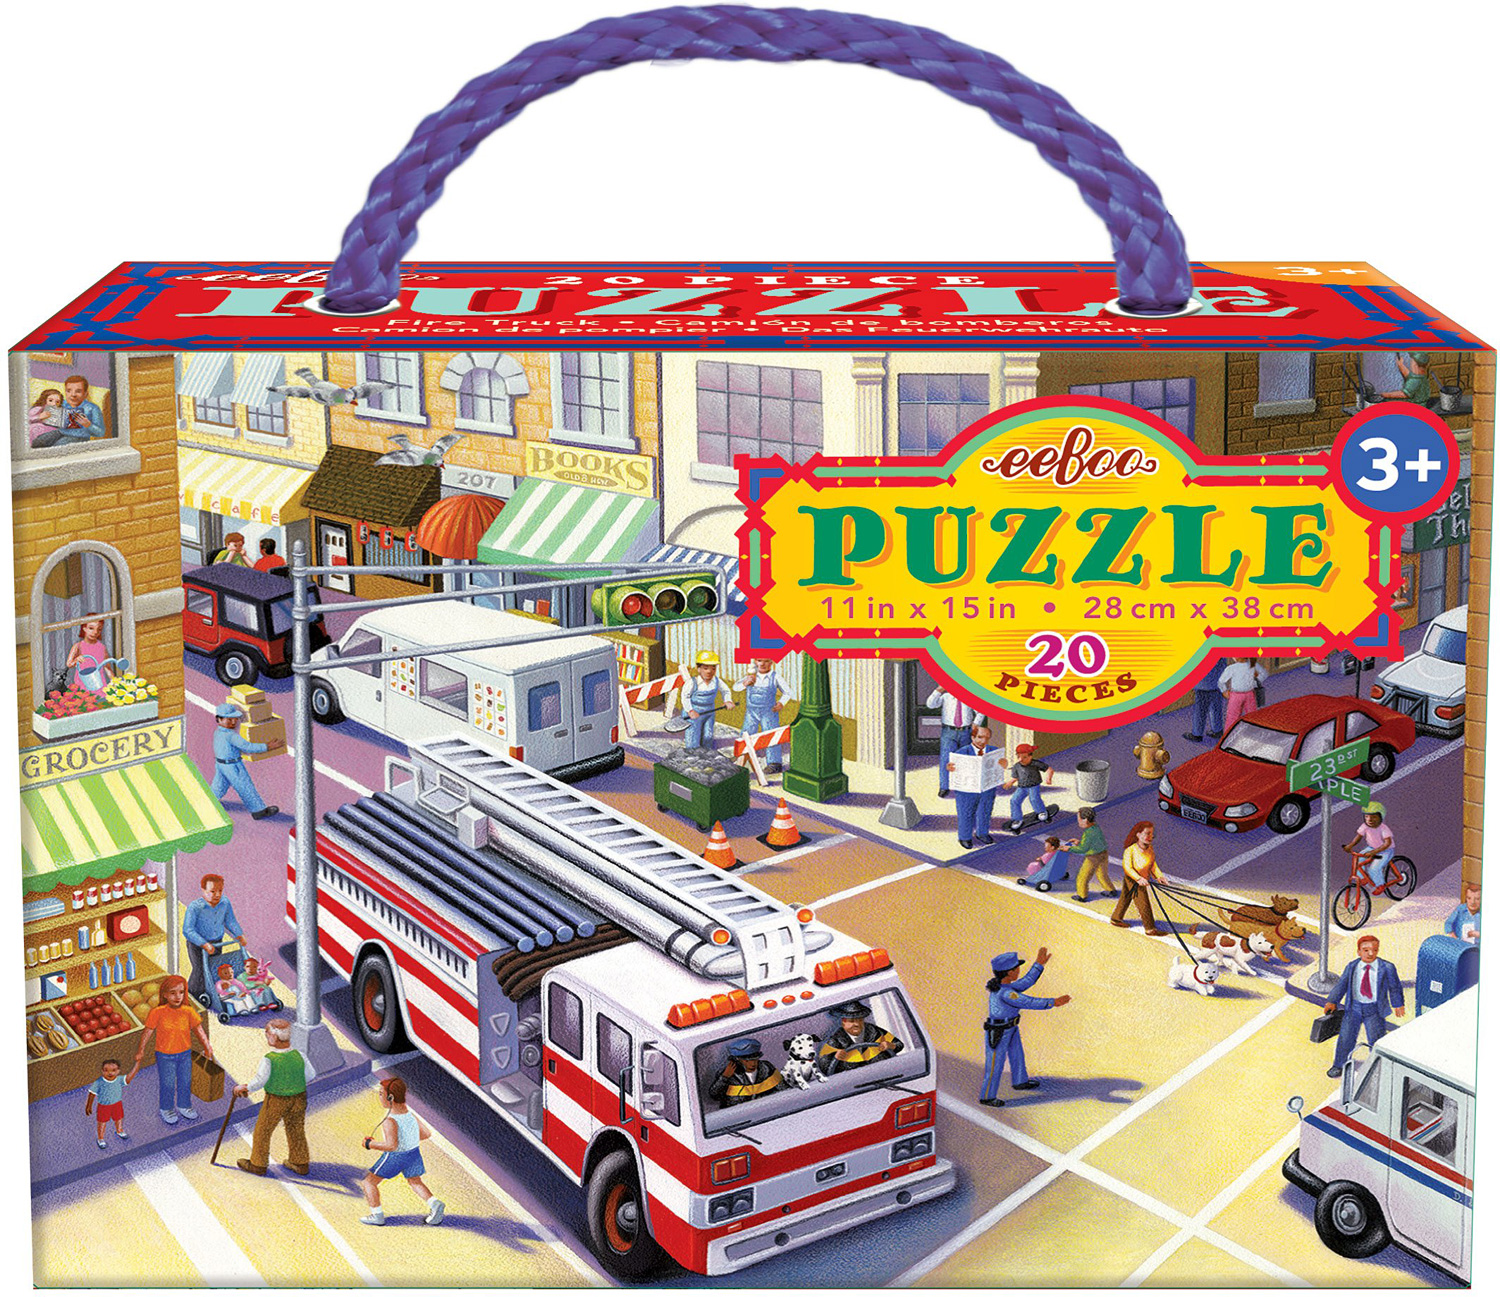 fire-truck-20-piece-puzzle-on-classic-toys-toydango